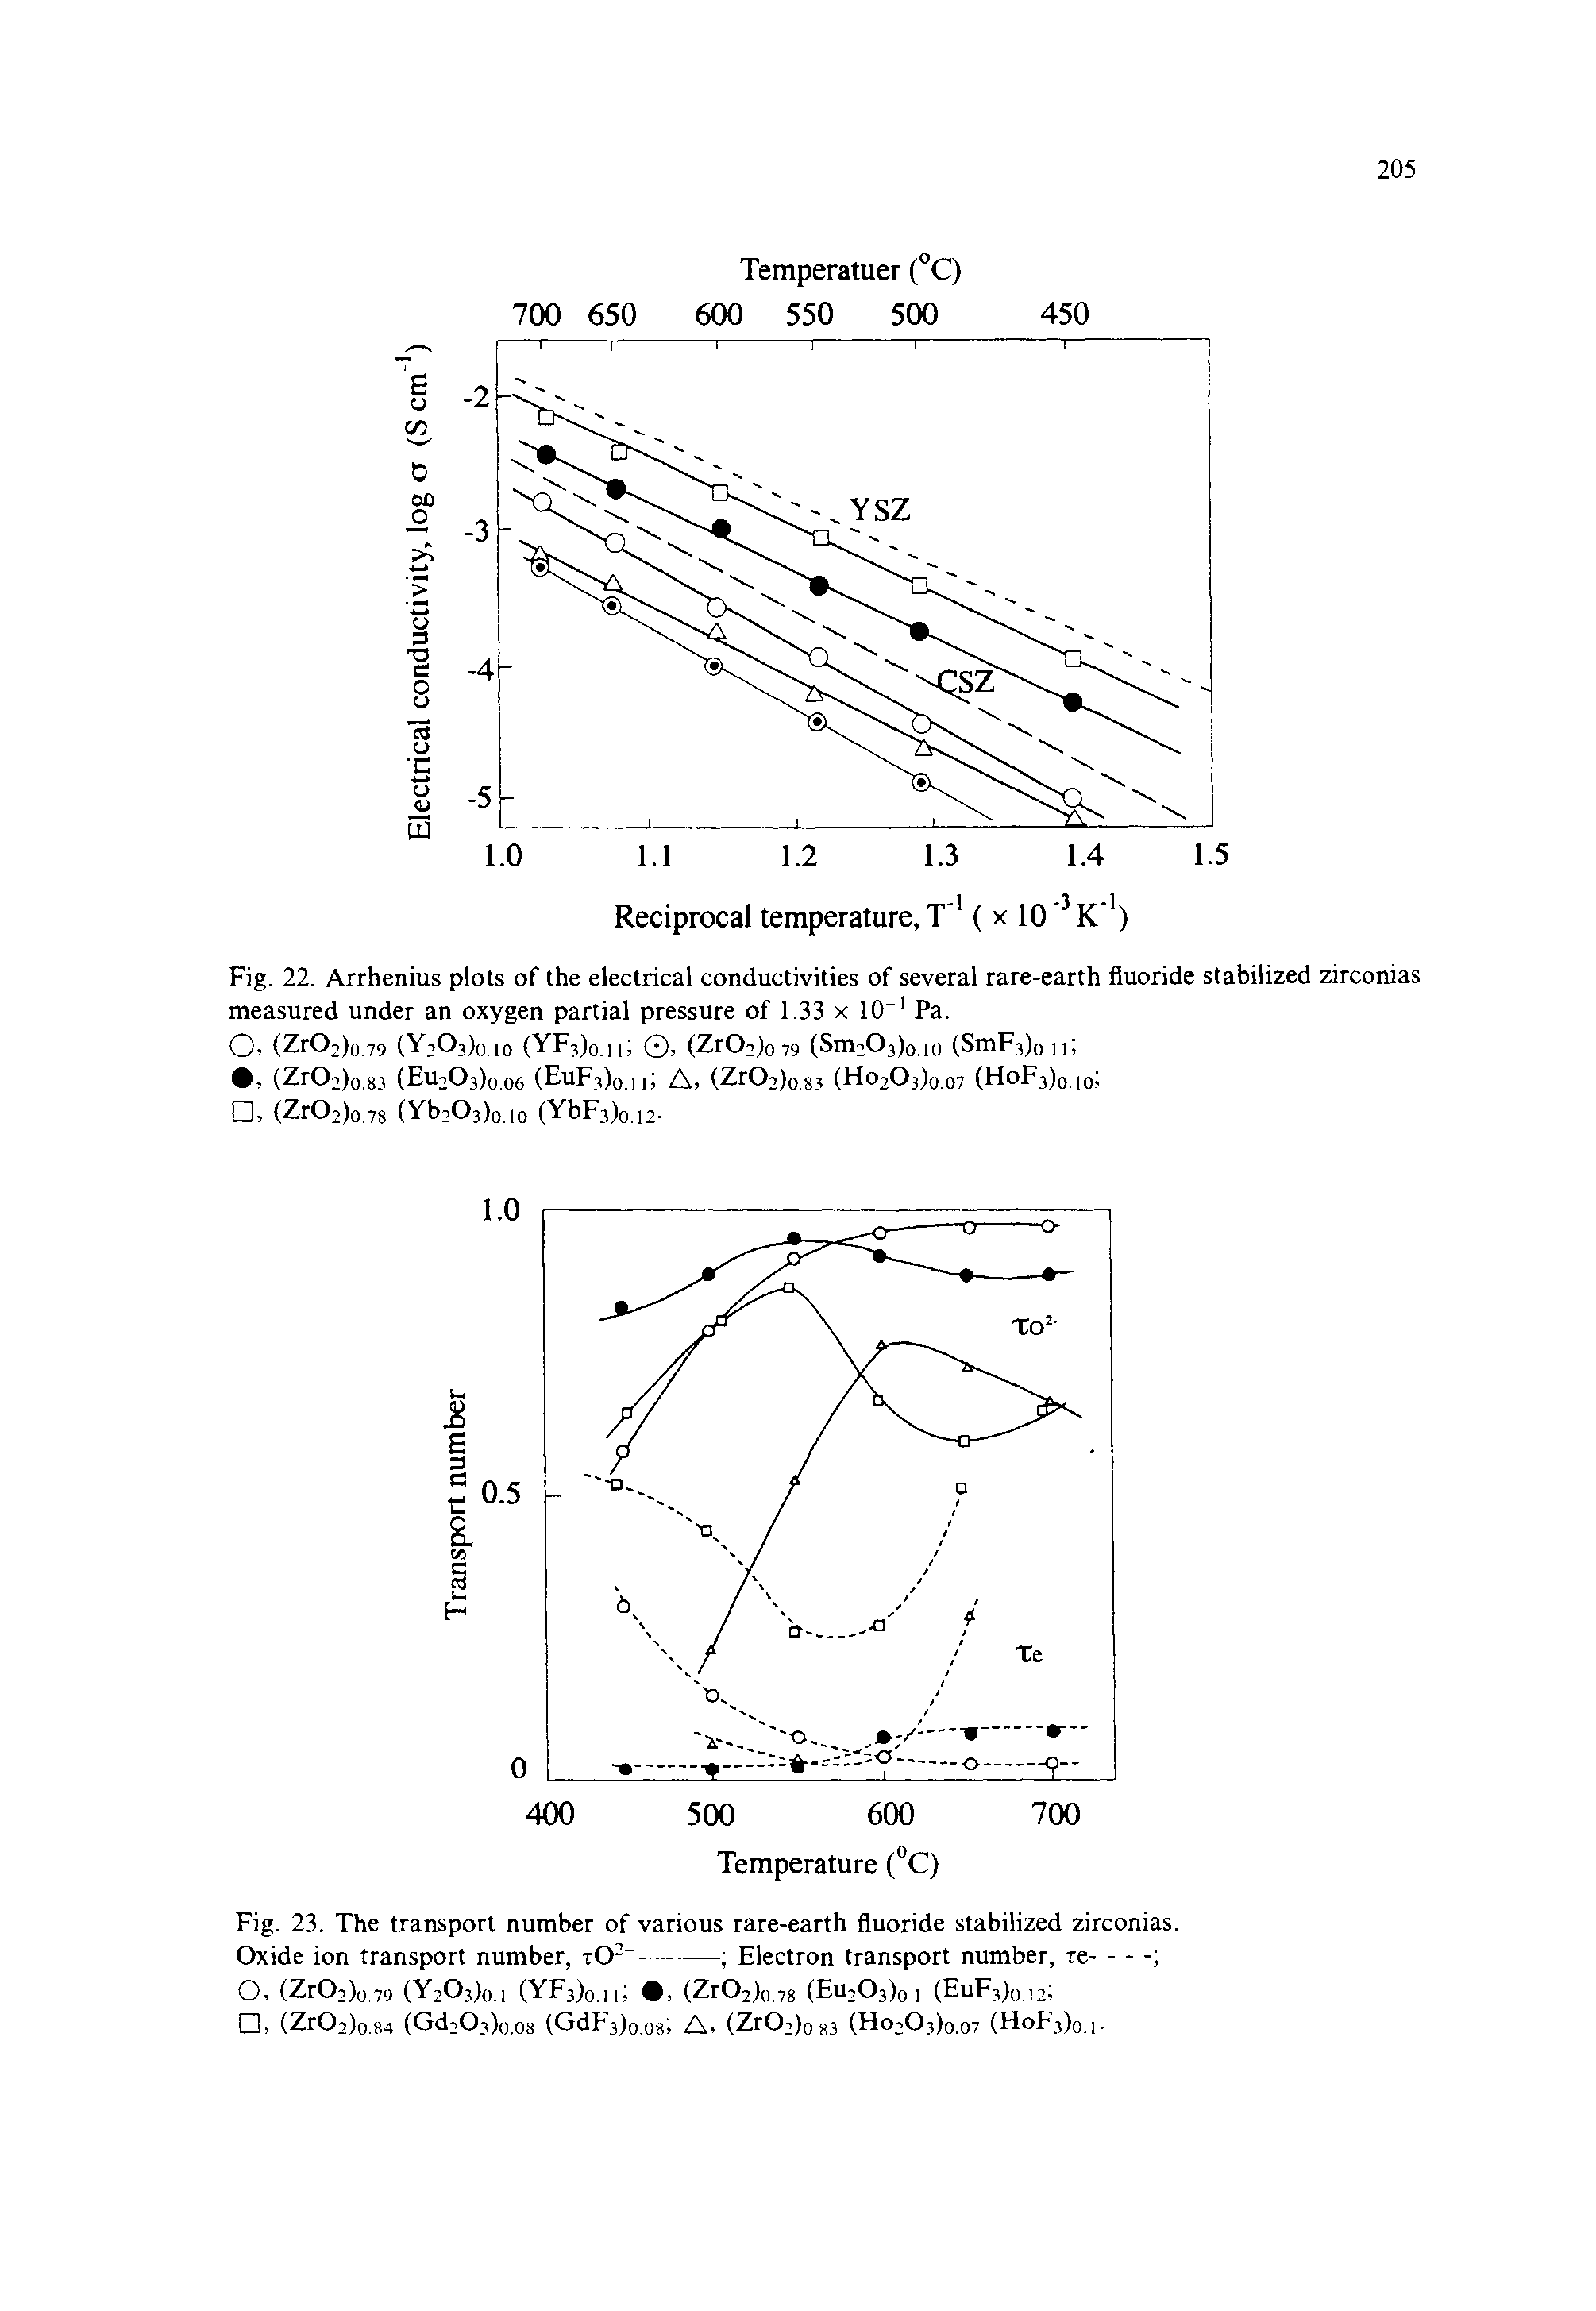 Fig. 22. Arrhenius plots of the electrical conductivities of several rare-earth fluoride stabilized zirconias measured under an oxygen partial pressure of 1.33 x 10 1 Pa.